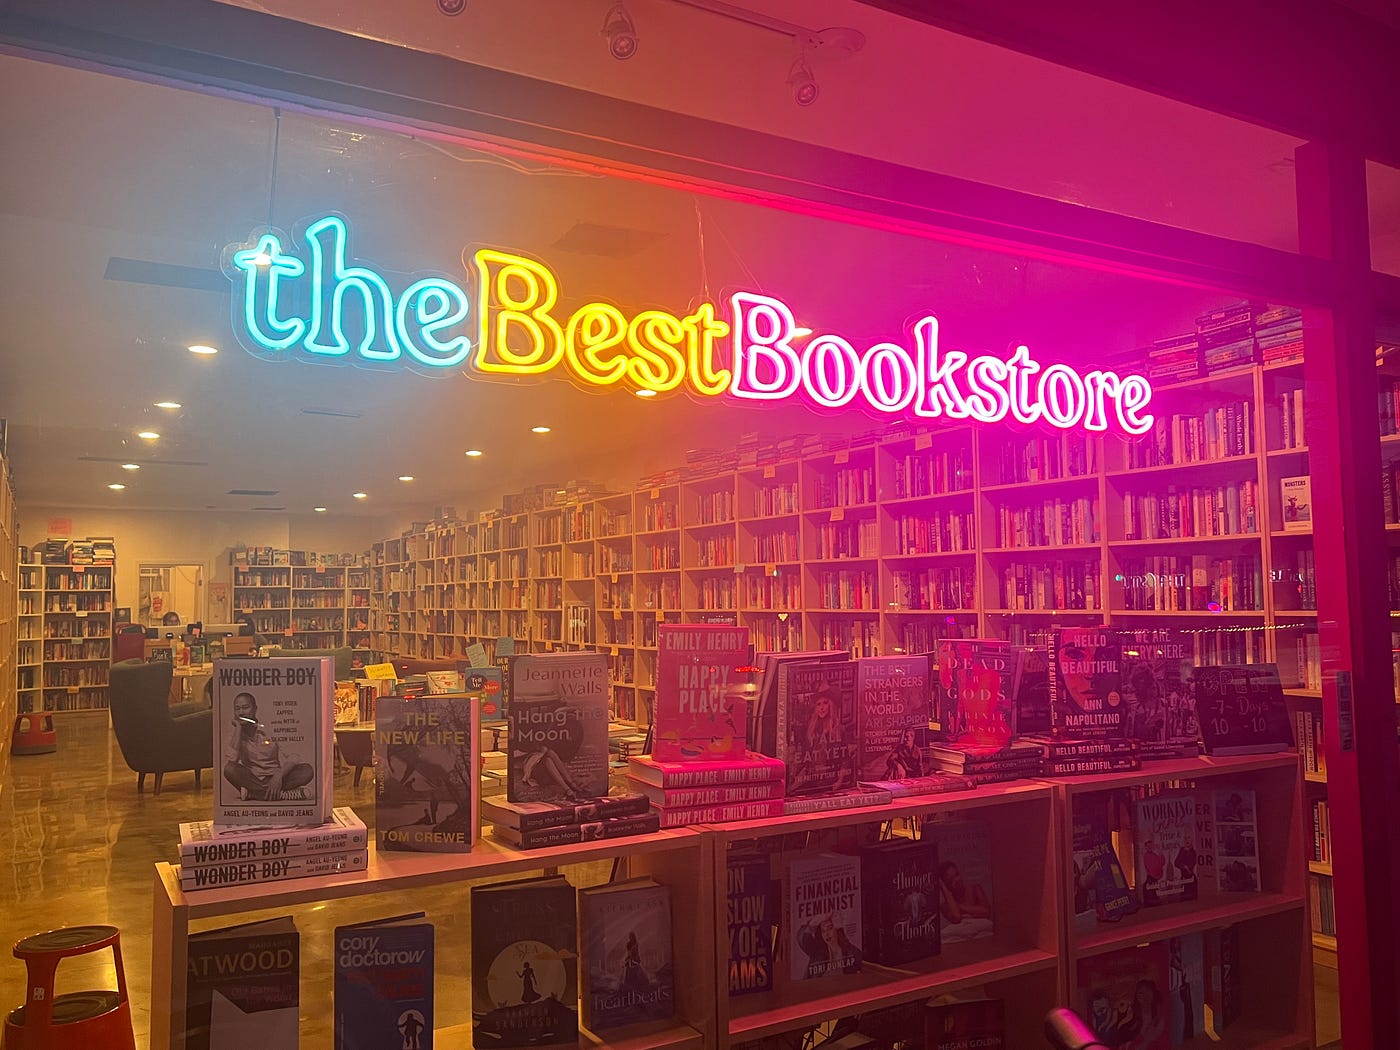 Palm Springs: where is the Best Bookstore?